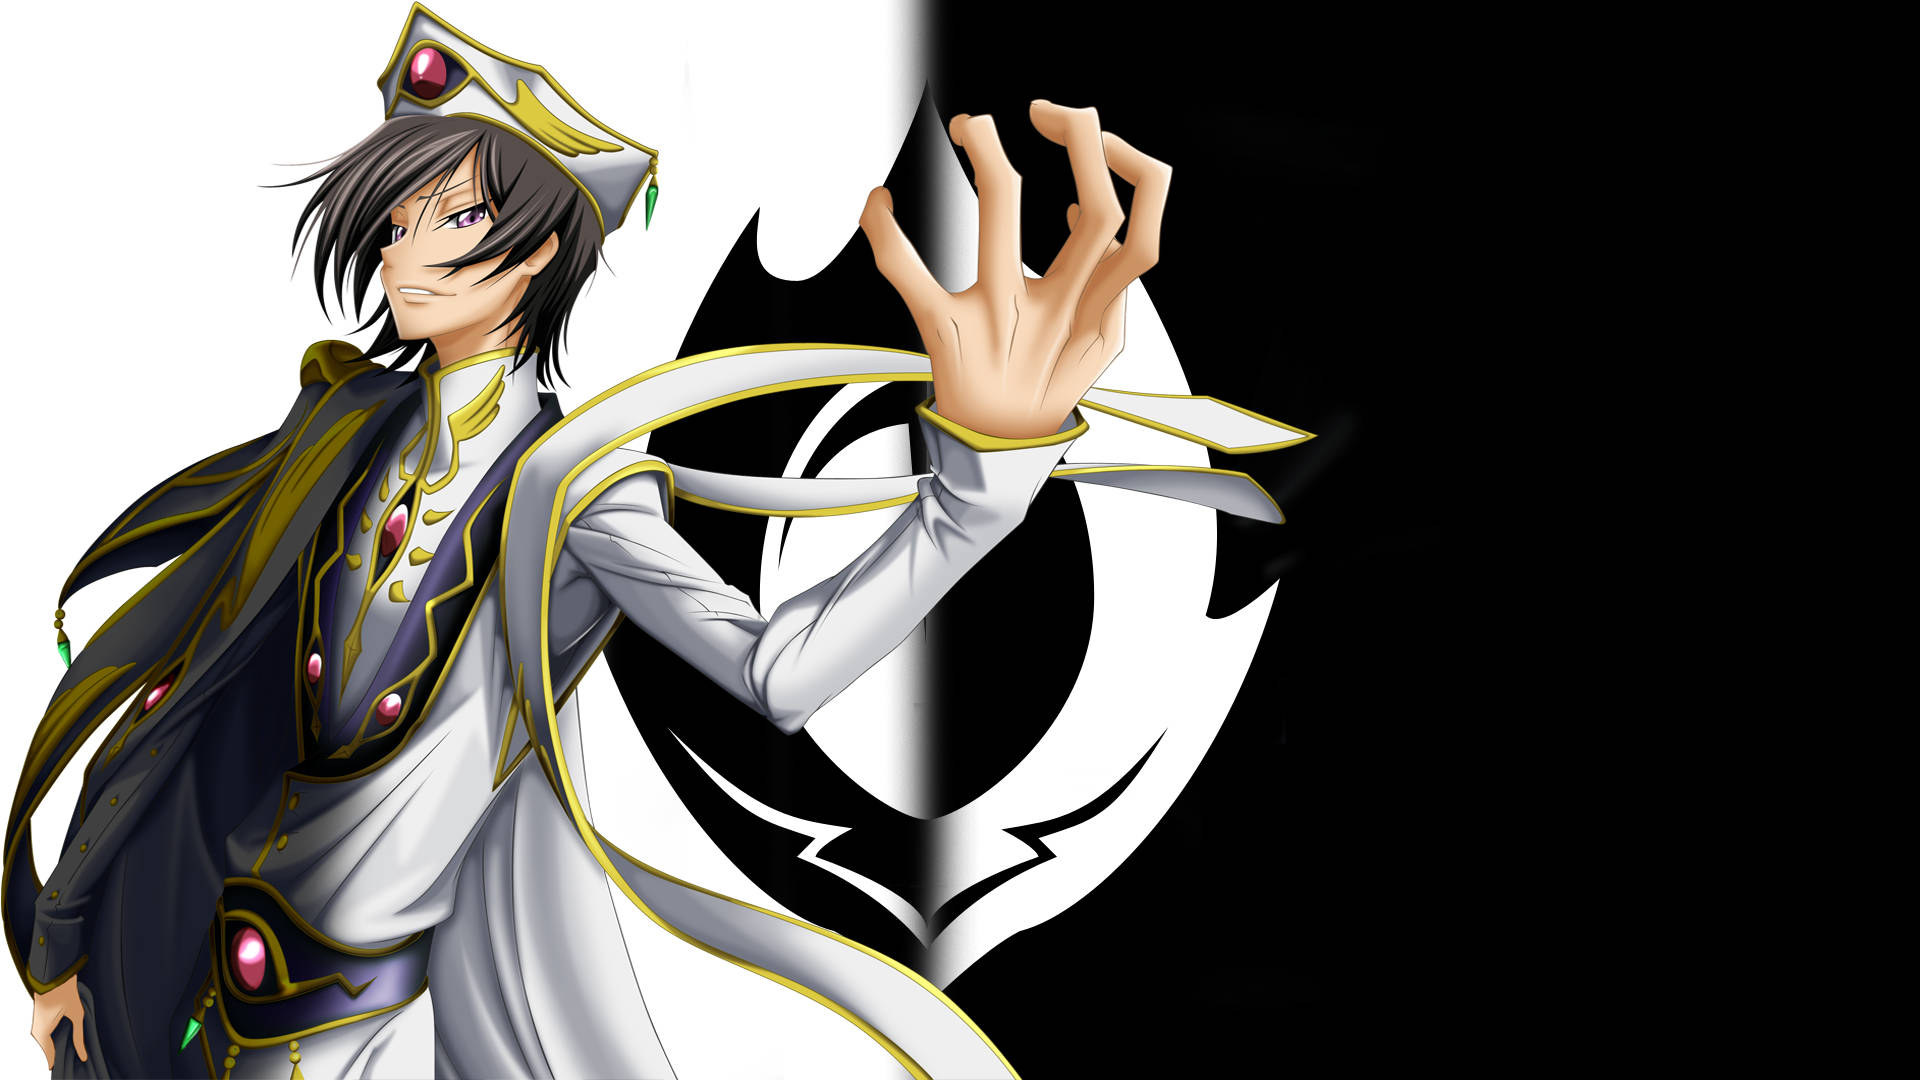 100+] Lelouch Wallpapers